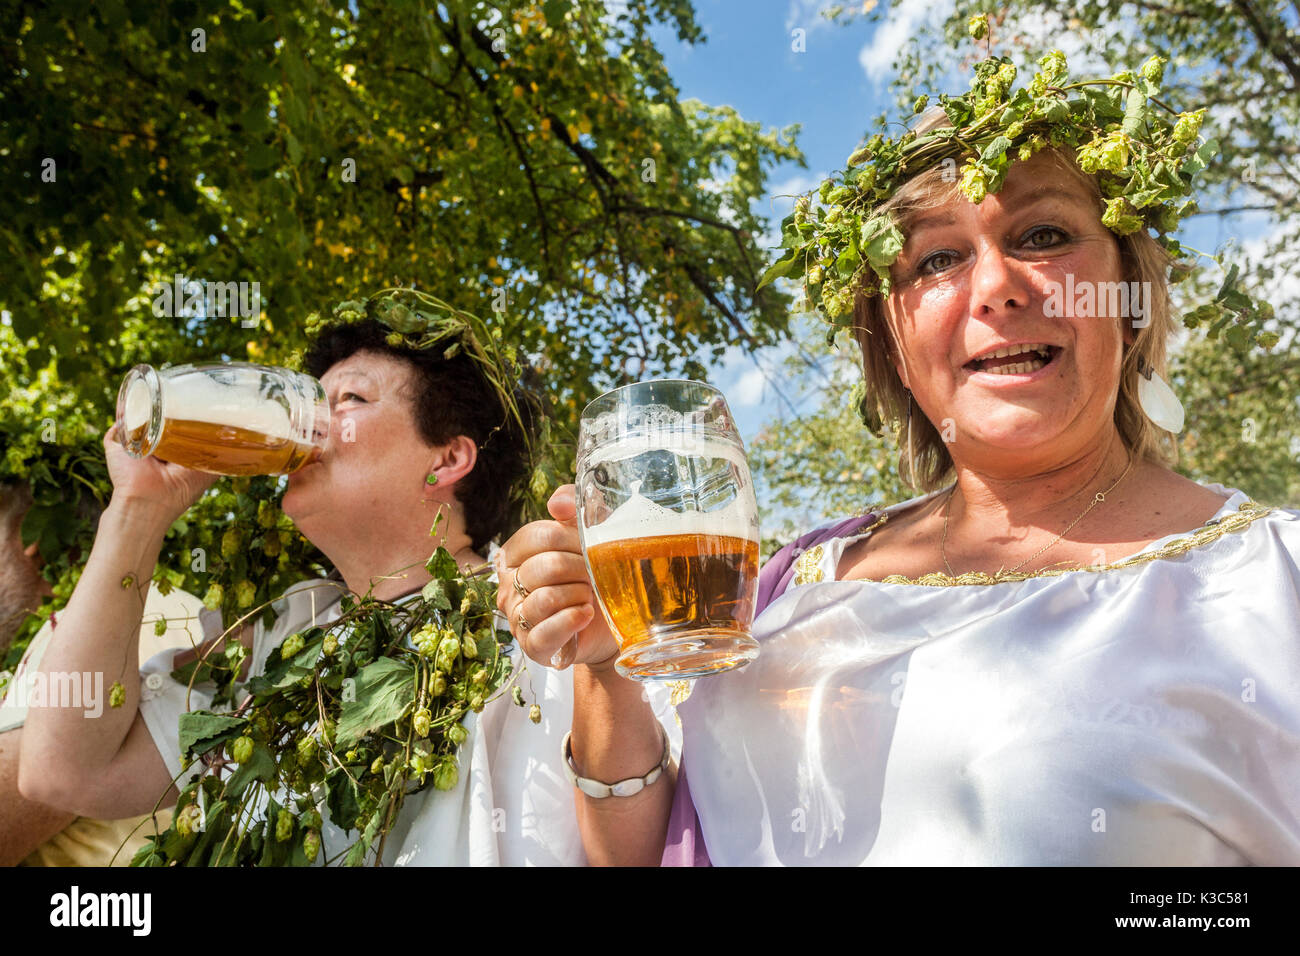 Goddess of hops visited and opened the Czech beer festival, Woman drinking beer, Czech Republic beer women decorated with a hop wreath, beer plant Stock Photo